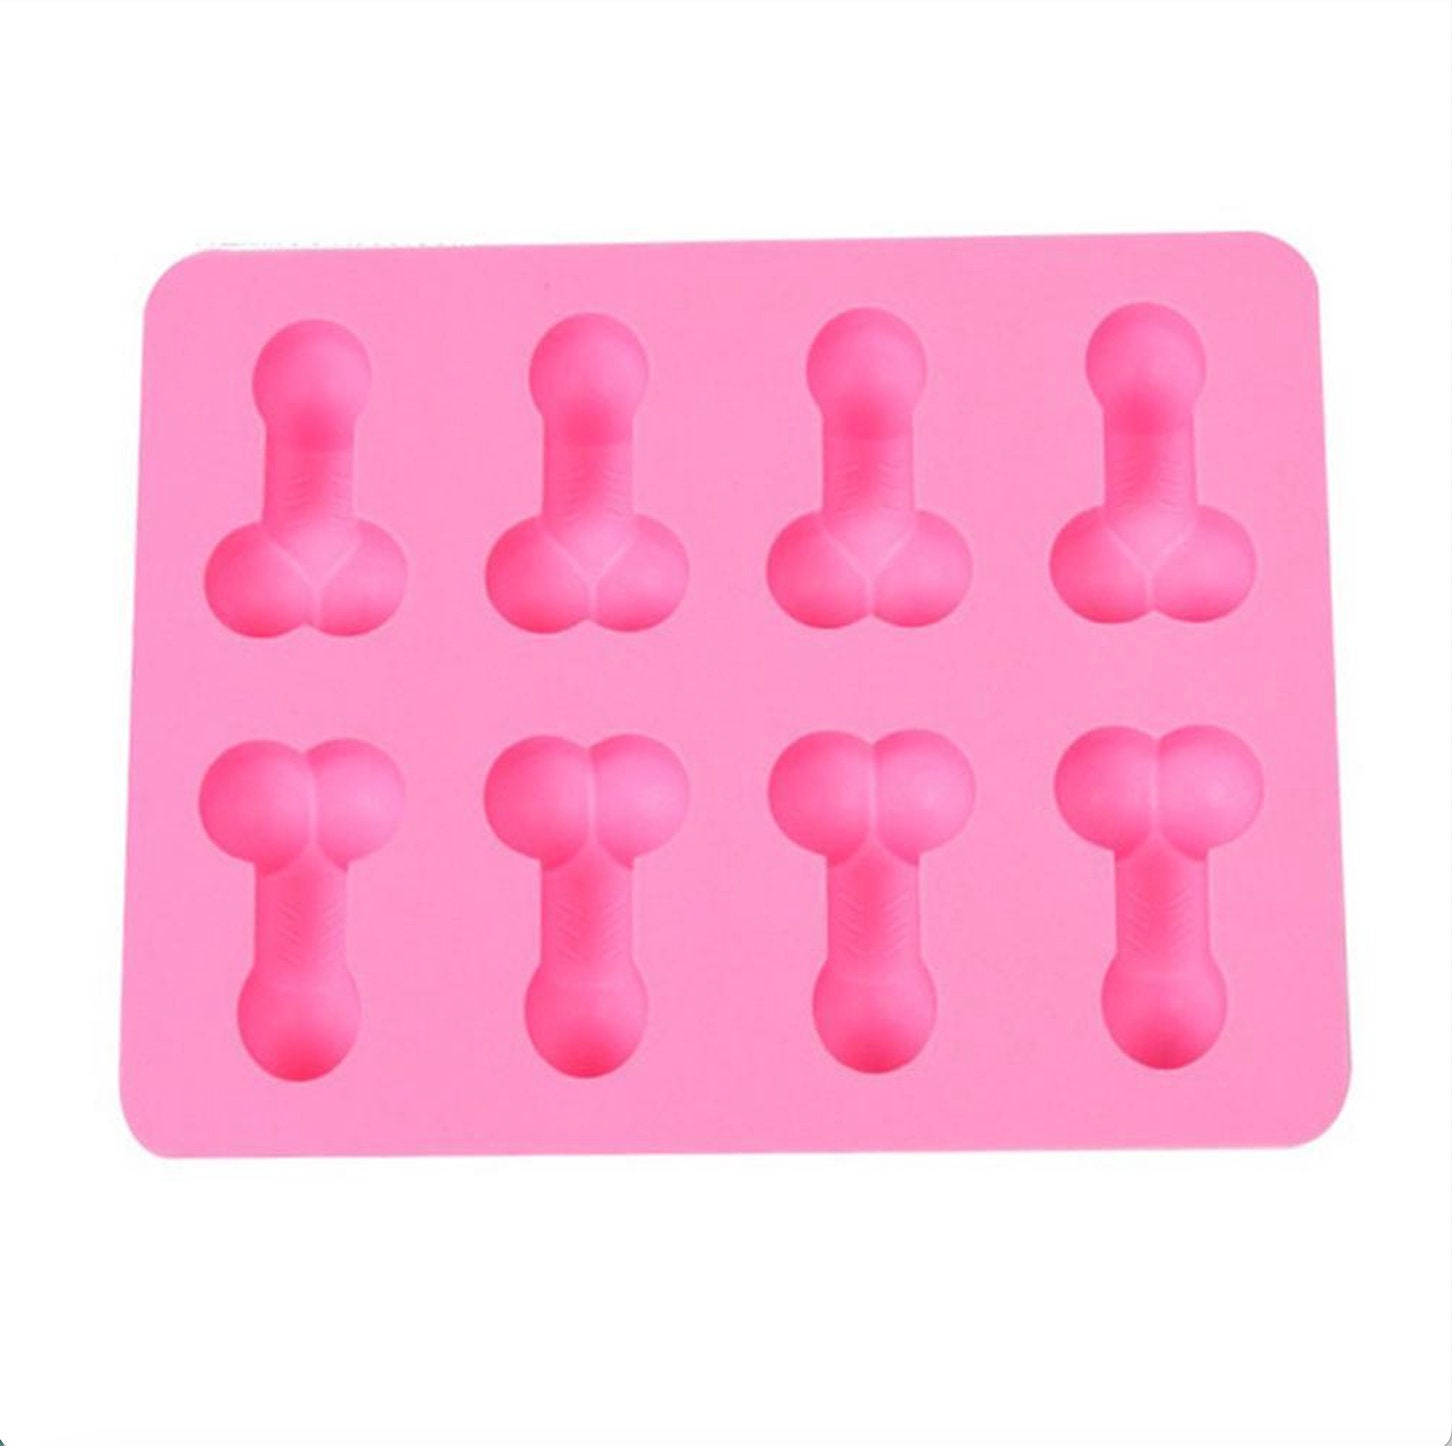 Adult Prank Funny Ice Cube Tray for Gag Party Joke Gifts,Adult Prank Ice  Cube Mold,Adult Ice Cube Molds,Penis Ice Cube Mold,Silicone Ice Cube Mold